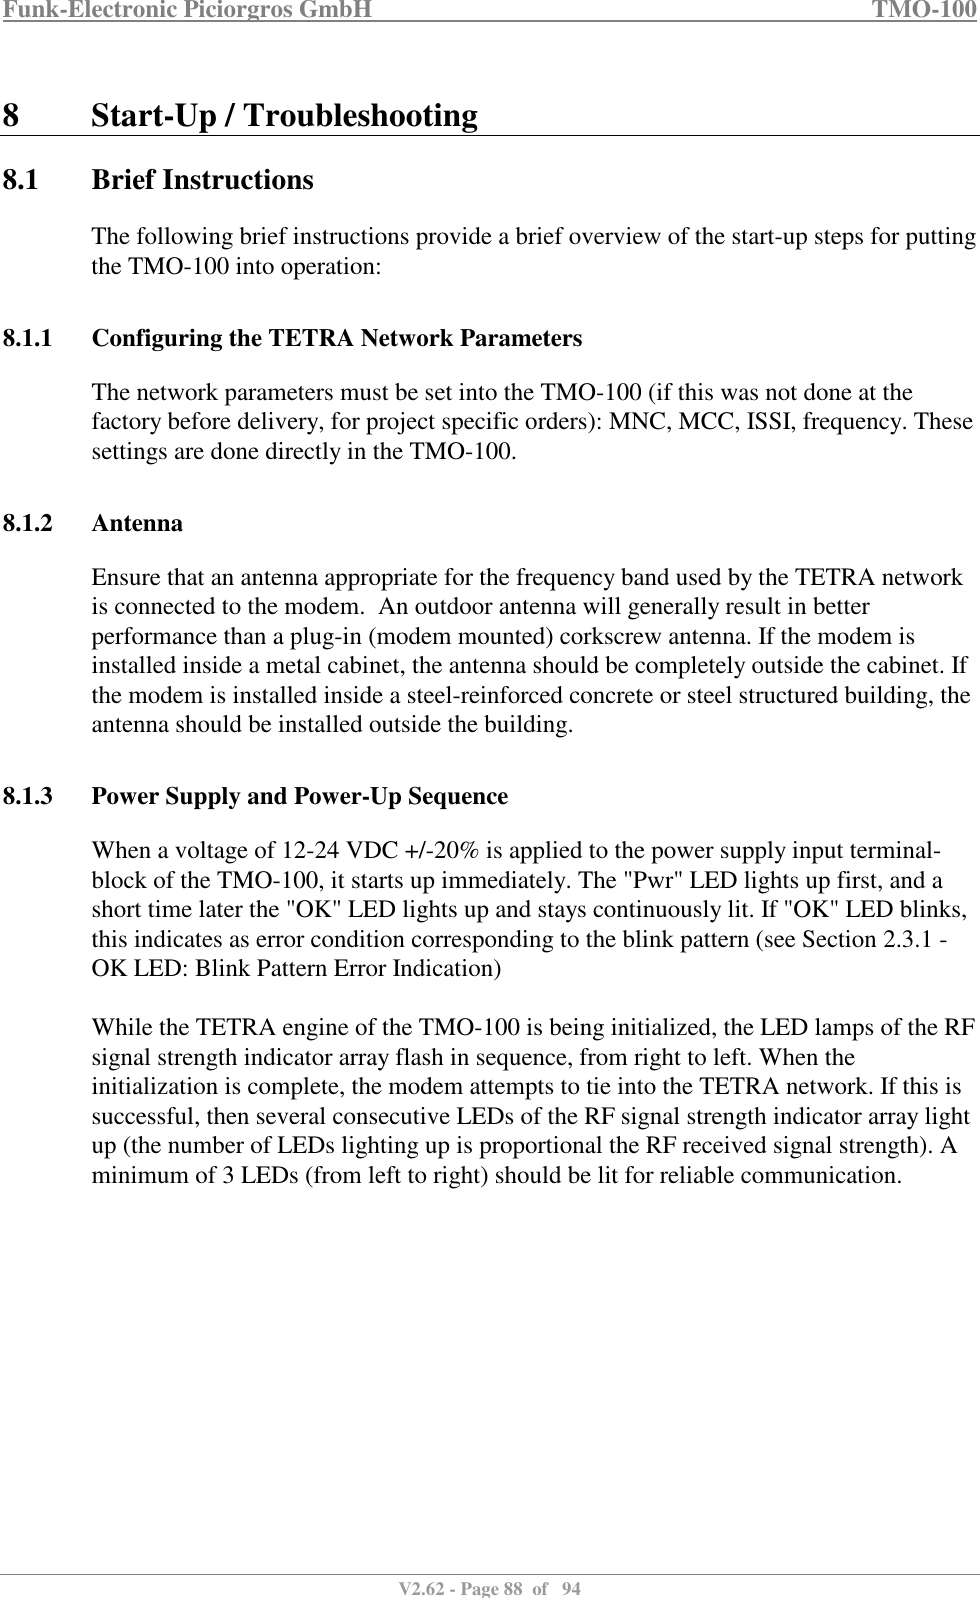 Funk-Electronic Piciorgros GmbH   TMO-100   V2.62 - Page 88  of   94   8 Start-Up / Troubleshooting 8.1 Brief Instructions The following brief instructions provide a brief overview of the start-up steps for putting the TMO-100 into operation:  8.1.1 Configuring the TETRA Network Parameters The network parameters must be set into the TMO-100 (if this was not done at the factory before delivery, for project specific orders): MNC, MCC, ISSI, frequency. These settings are done directly in the TMO-100.  8.1.2 Antenna Ensure that an antenna appropriate for the frequency band used by the TETRA network is connected to the modem.  An outdoor antenna will generally result in better performance than a plug-in (modem mounted) corkscrew antenna. If the modem is installed inside a metal cabinet, the antenna should be completely outside the cabinet. If the modem is installed inside a steel-reinforced concrete or steel structured building, the antenna should be installed outside the building.  8.1.3 Power Supply and Power-Up Sequence When a voltage of 12-24 VDC +/-20% is applied to the power supply input terminal-block of the TMO-100, it starts up immediately. The &quot;Pwr&quot; LED lights up first, and a short time later the &quot;OK&quot; LED lights up and stays continuously lit. If &quot;OK&quot; LED blinks, this indicates as error condition corresponding to the blink pattern (see Section 2.3.1 - OK LED: Blink Pattern Error Indication)  While the TETRA engine of the TMO-100 is being initialized, the LED lamps of the RF signal strength indicator array flash in sequence, from right to left. When the initialization is complete, the modem attempts to tie into the TETRA network. If this is successful, then several consecutive LEDs of the RF signal strength indicator array light up (the number of LEDs lighting up is proportional the RF received signal strength). A minimum of 3 LEDs (from left to right) should be lit for reliable communication.  